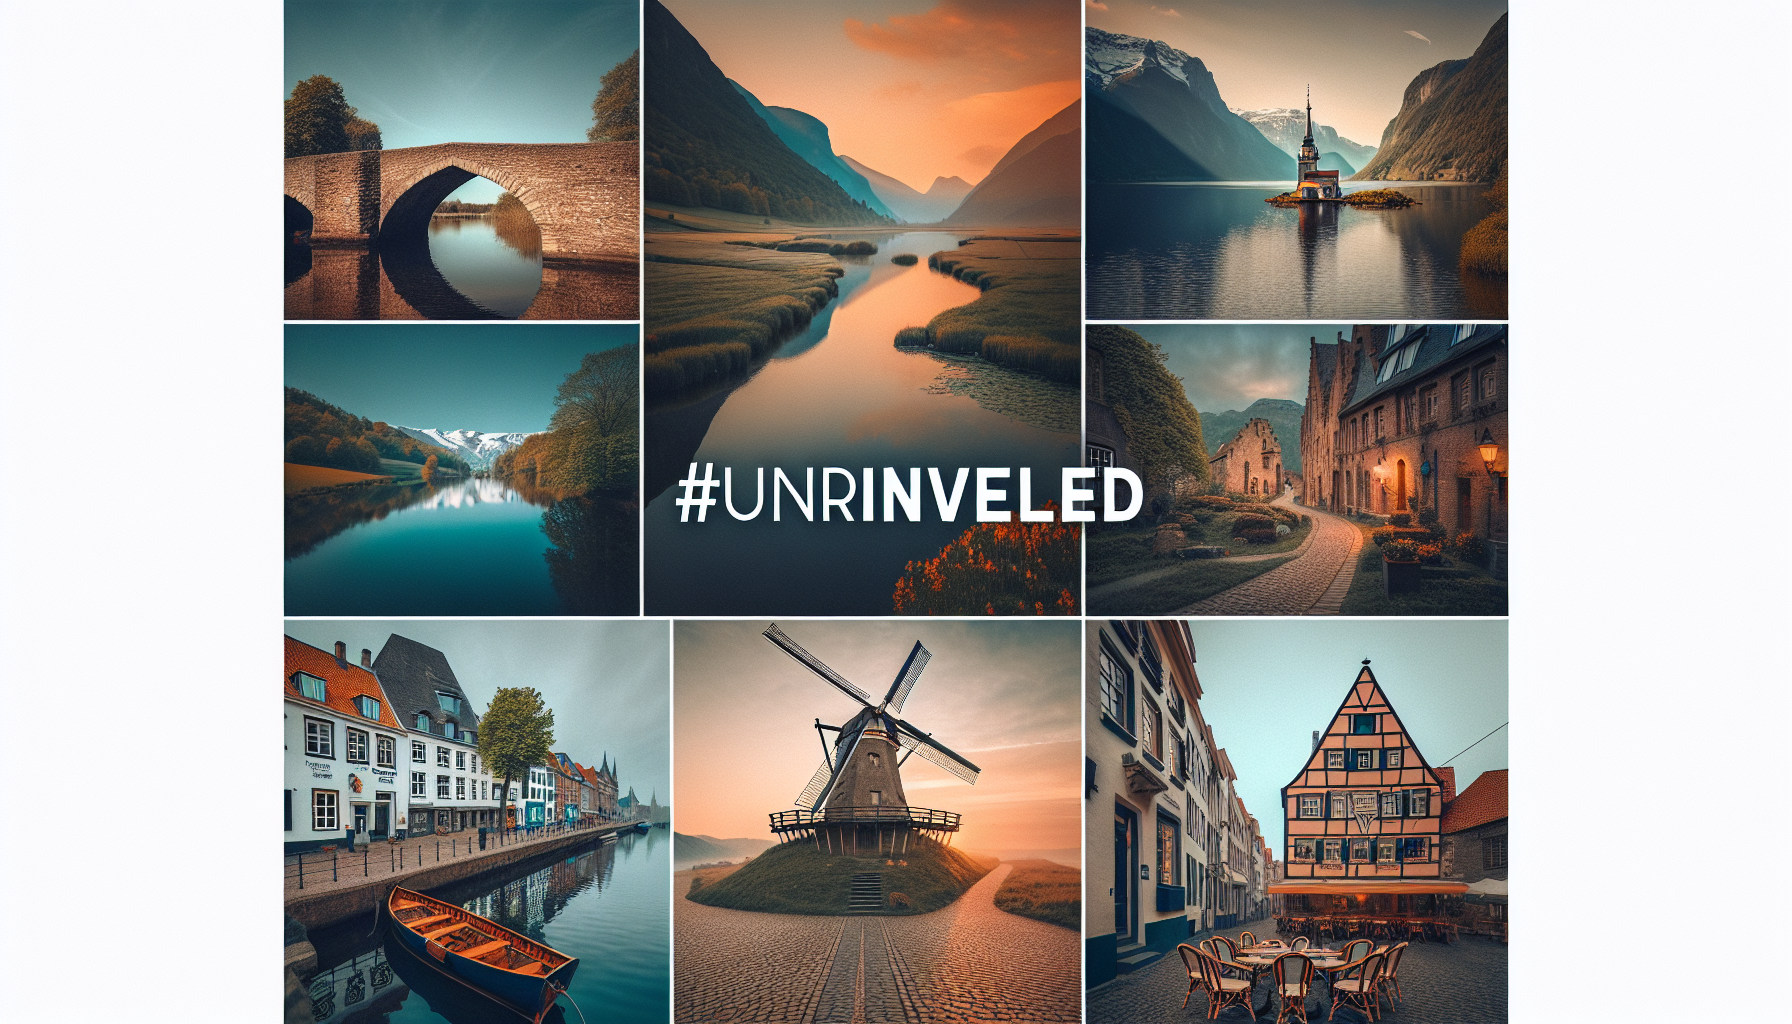 explore the hidden gems of europe waiting to be discovered and uncover the continent's best-kept secrets with our travel guide.